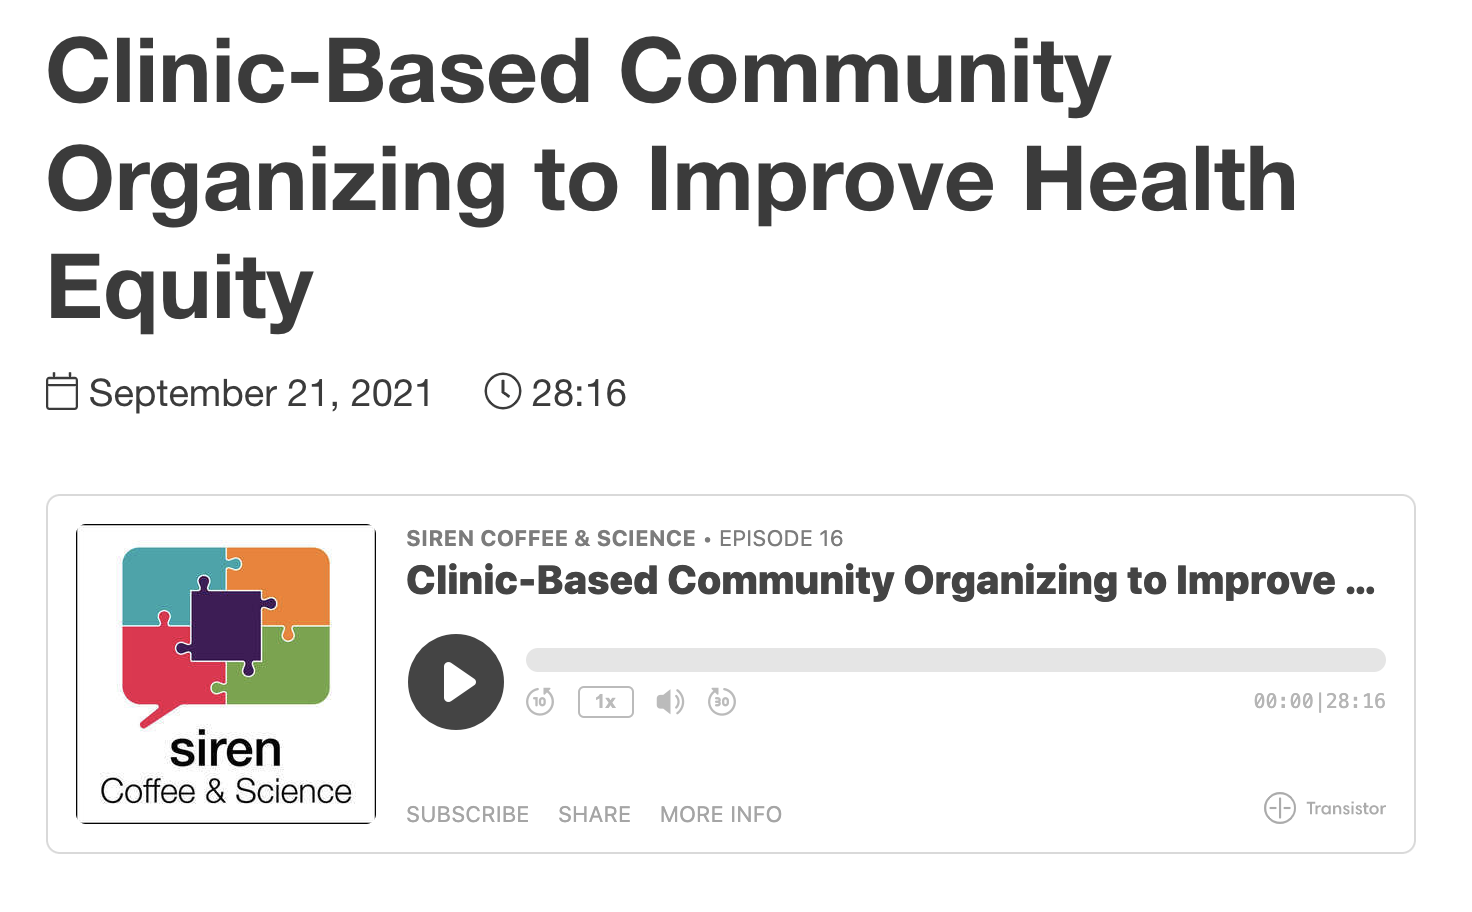 Clinic-Based Community Organizing to Improve Health Equity